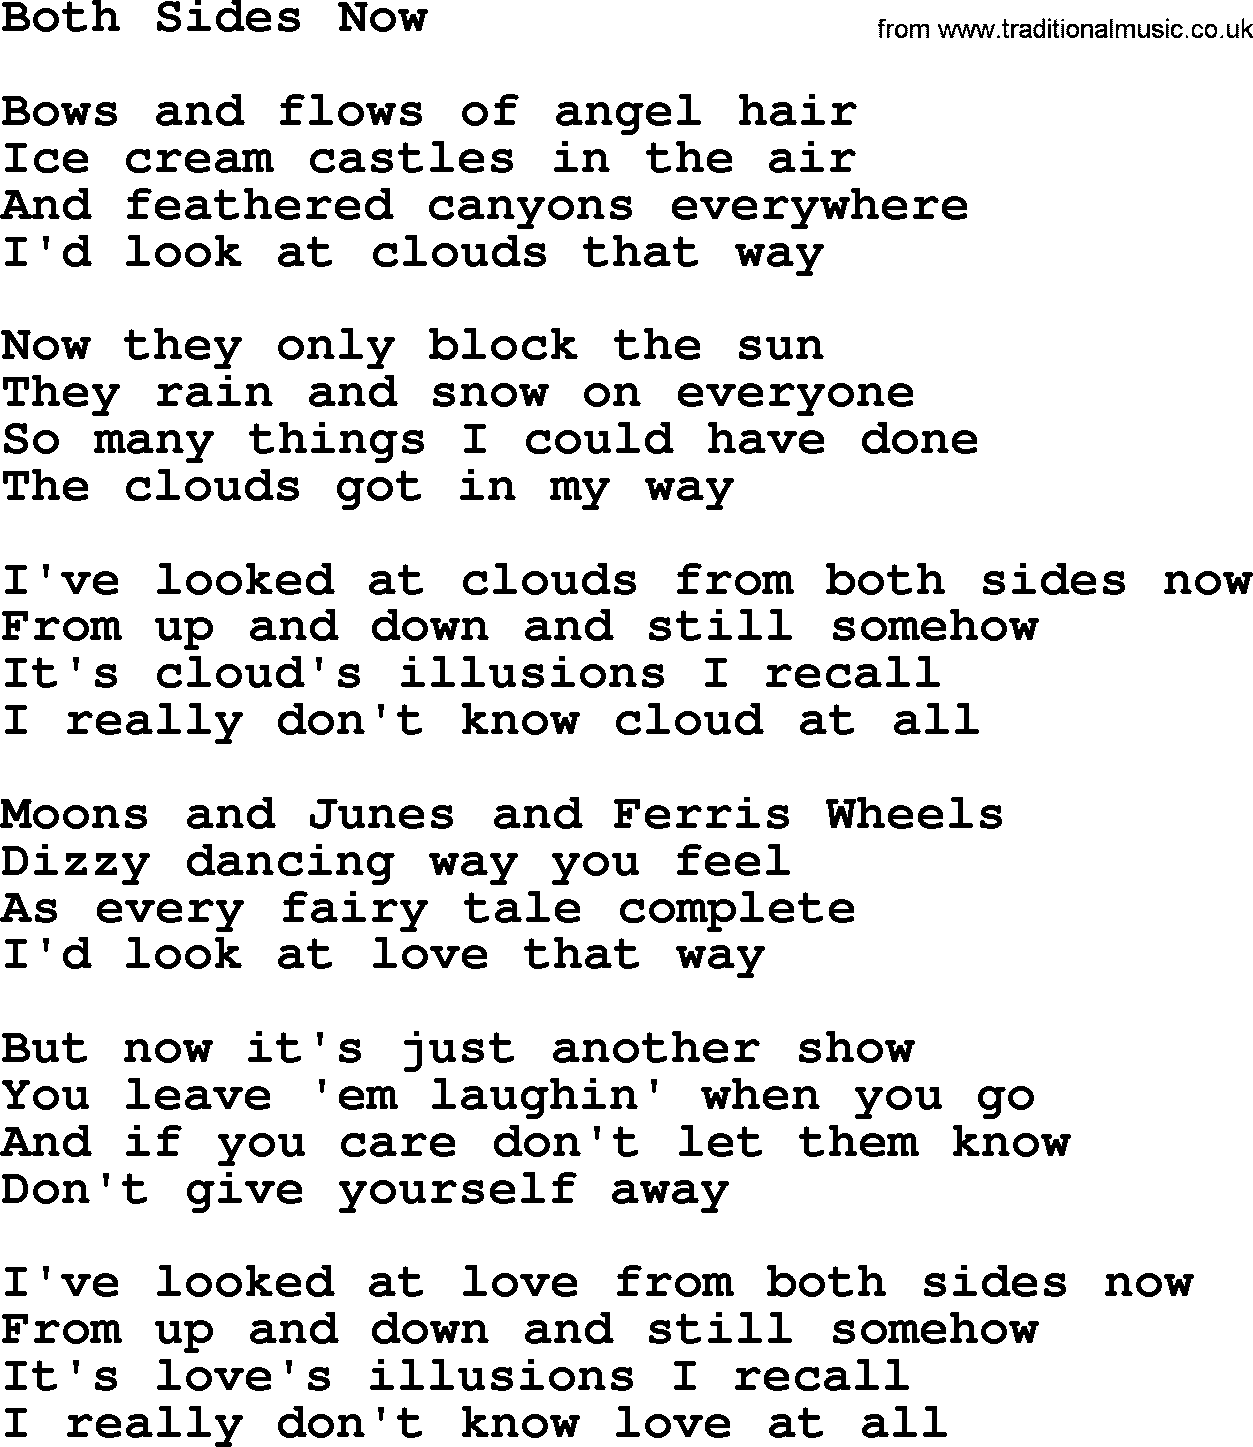 Willie Nelson song: Both Sides Now lyrics